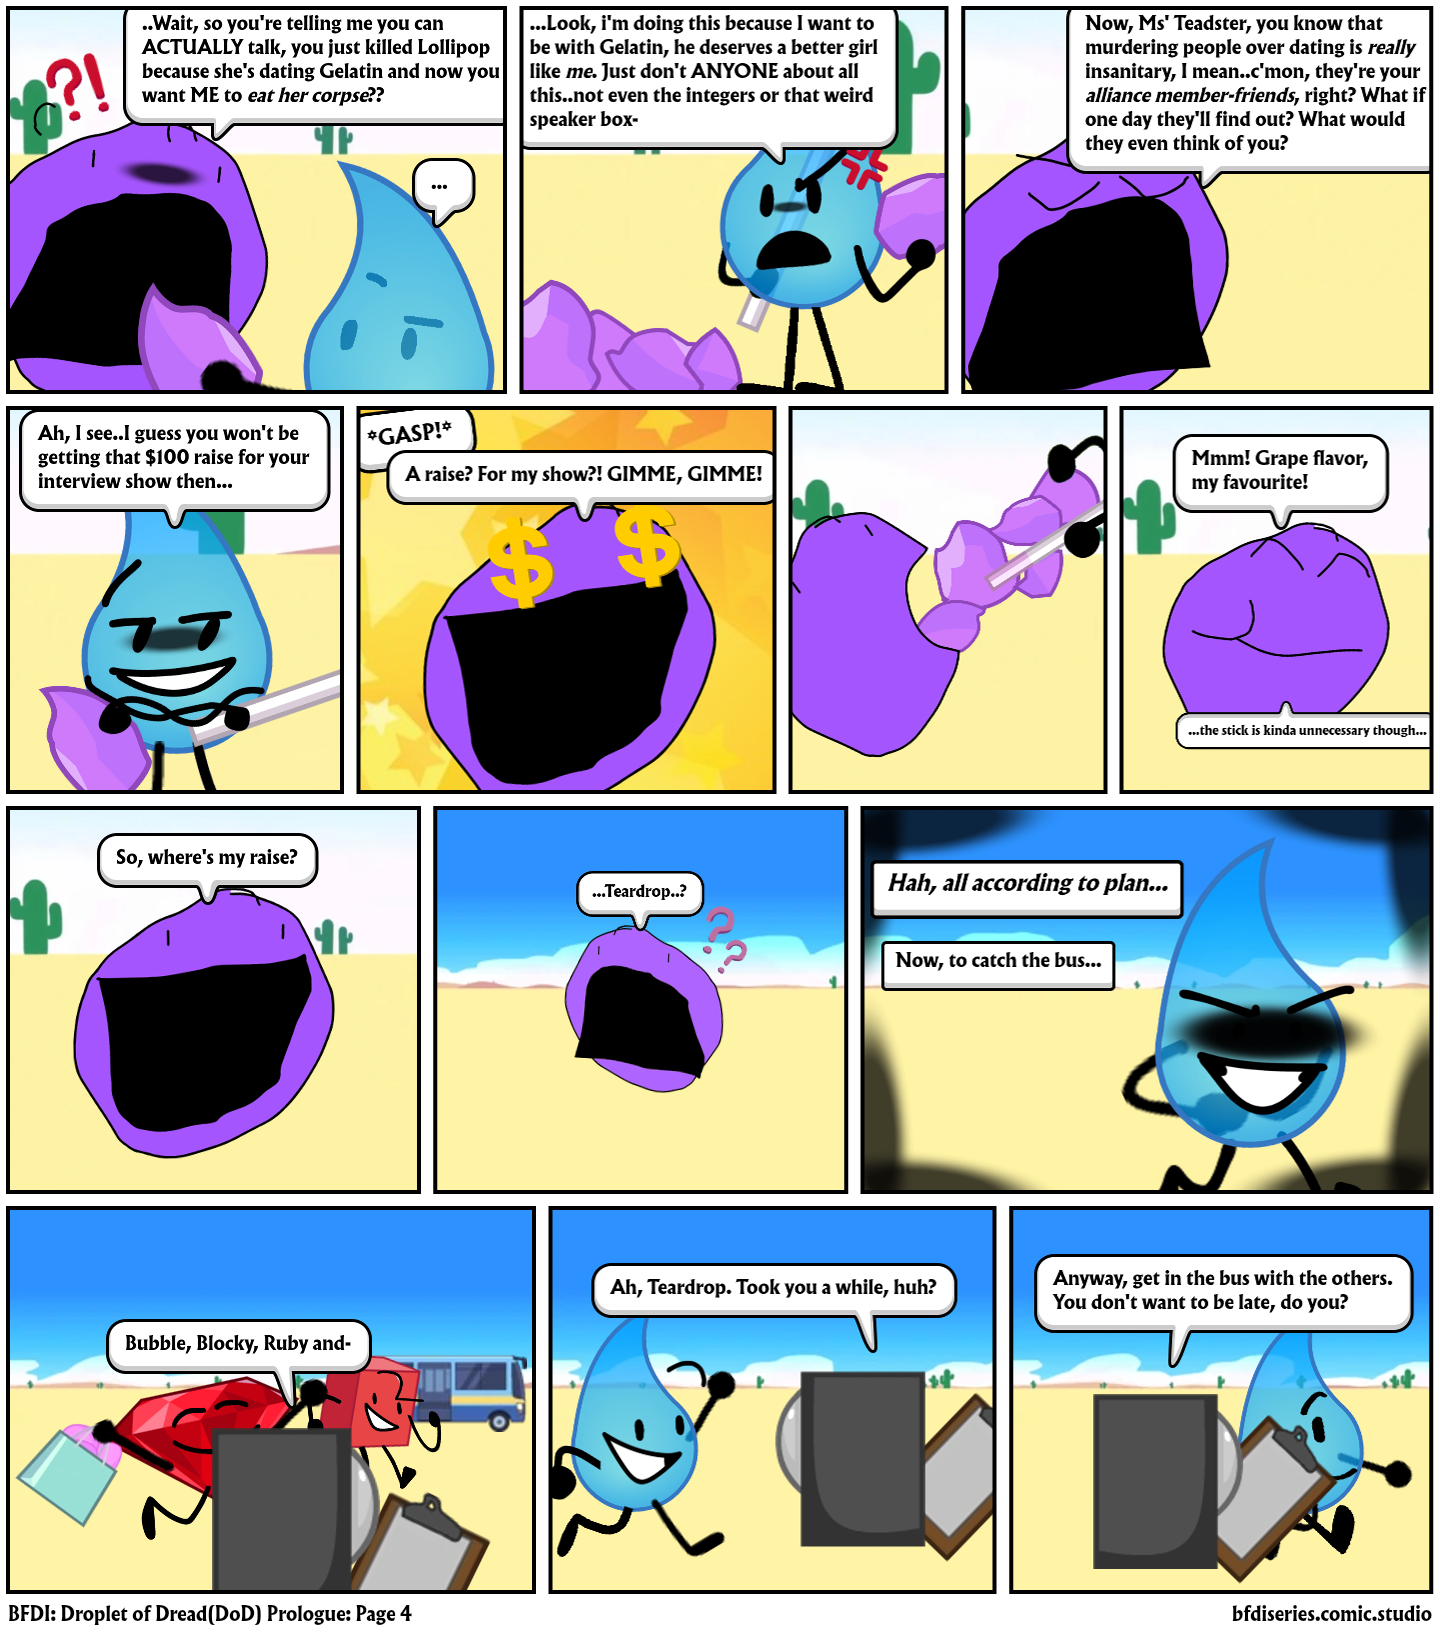 BFDI: Droplet of Dread(DoD) Prologue: Page 4